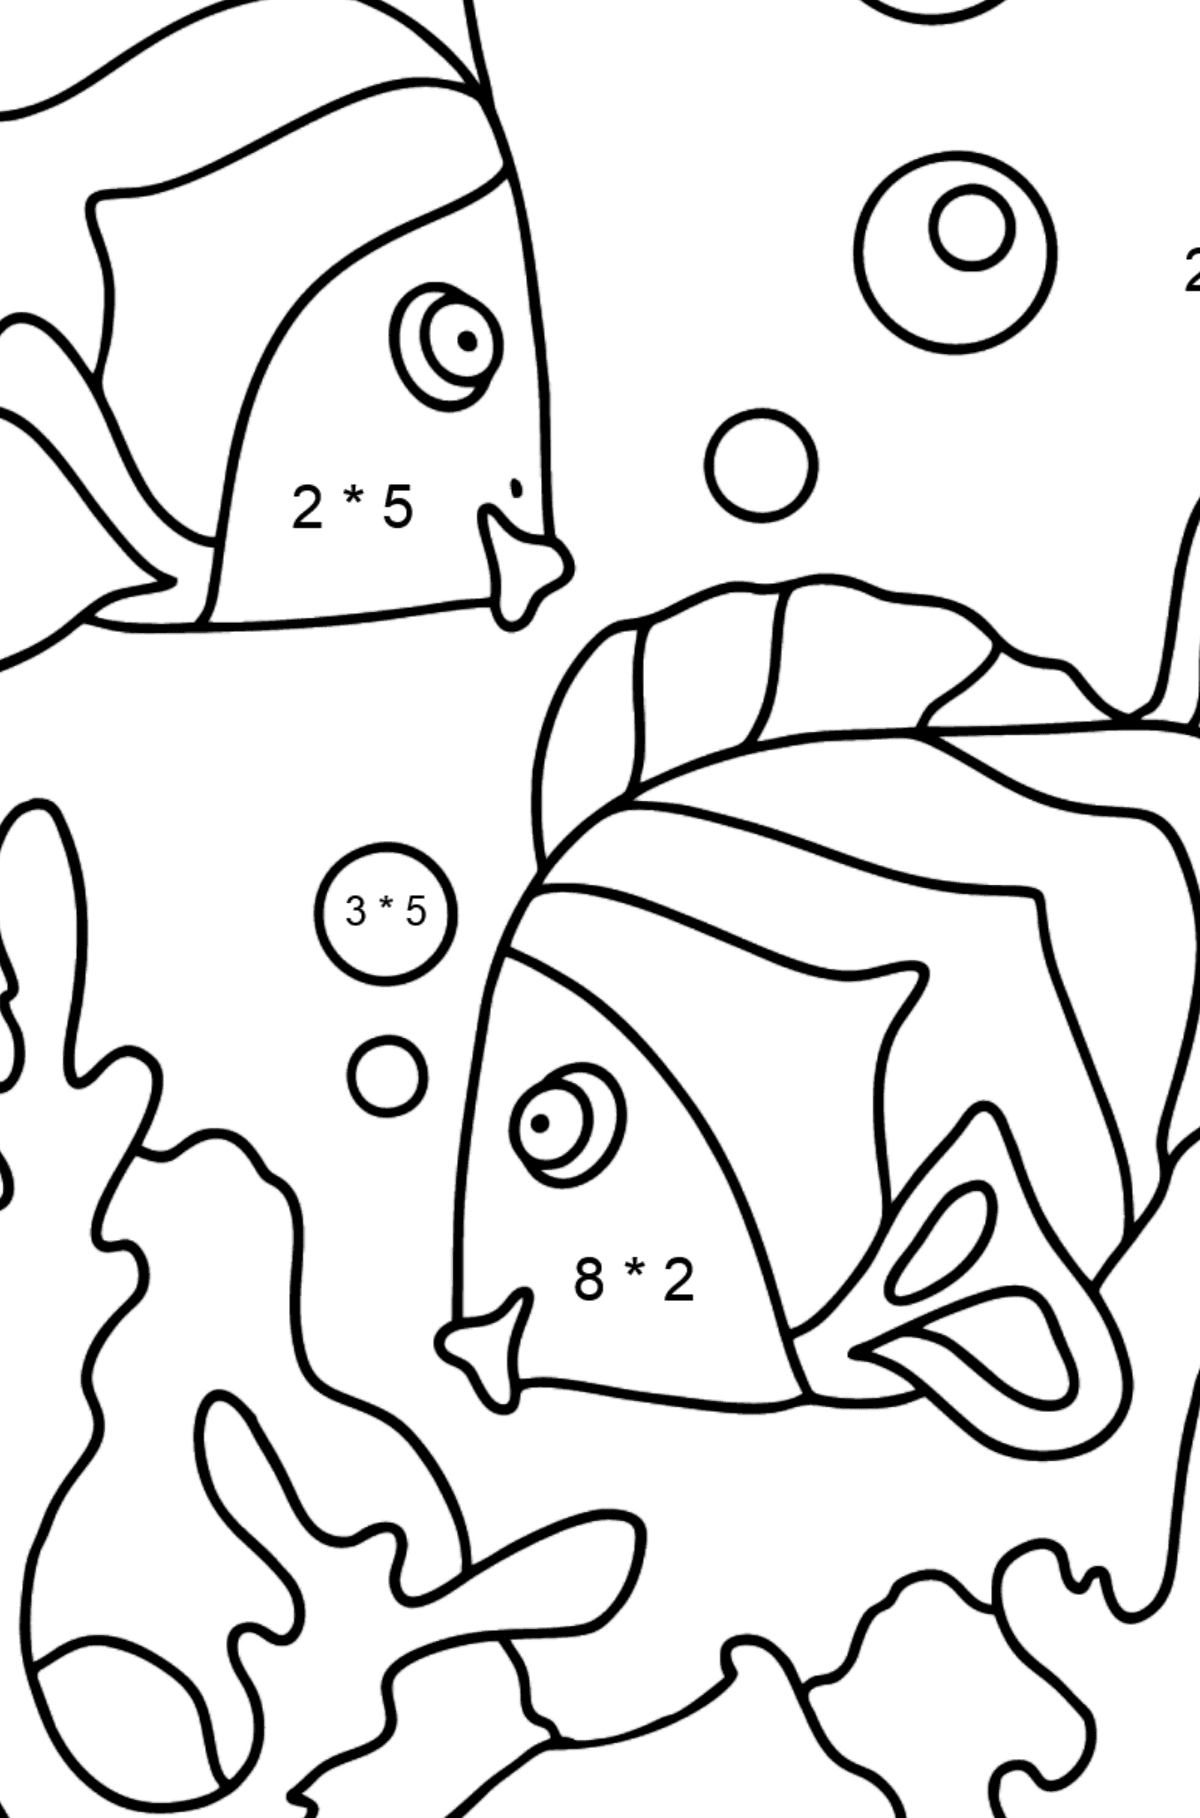 Coloring Page - Fish are Playing Happily - Math Coloring - Multiplication for Kids